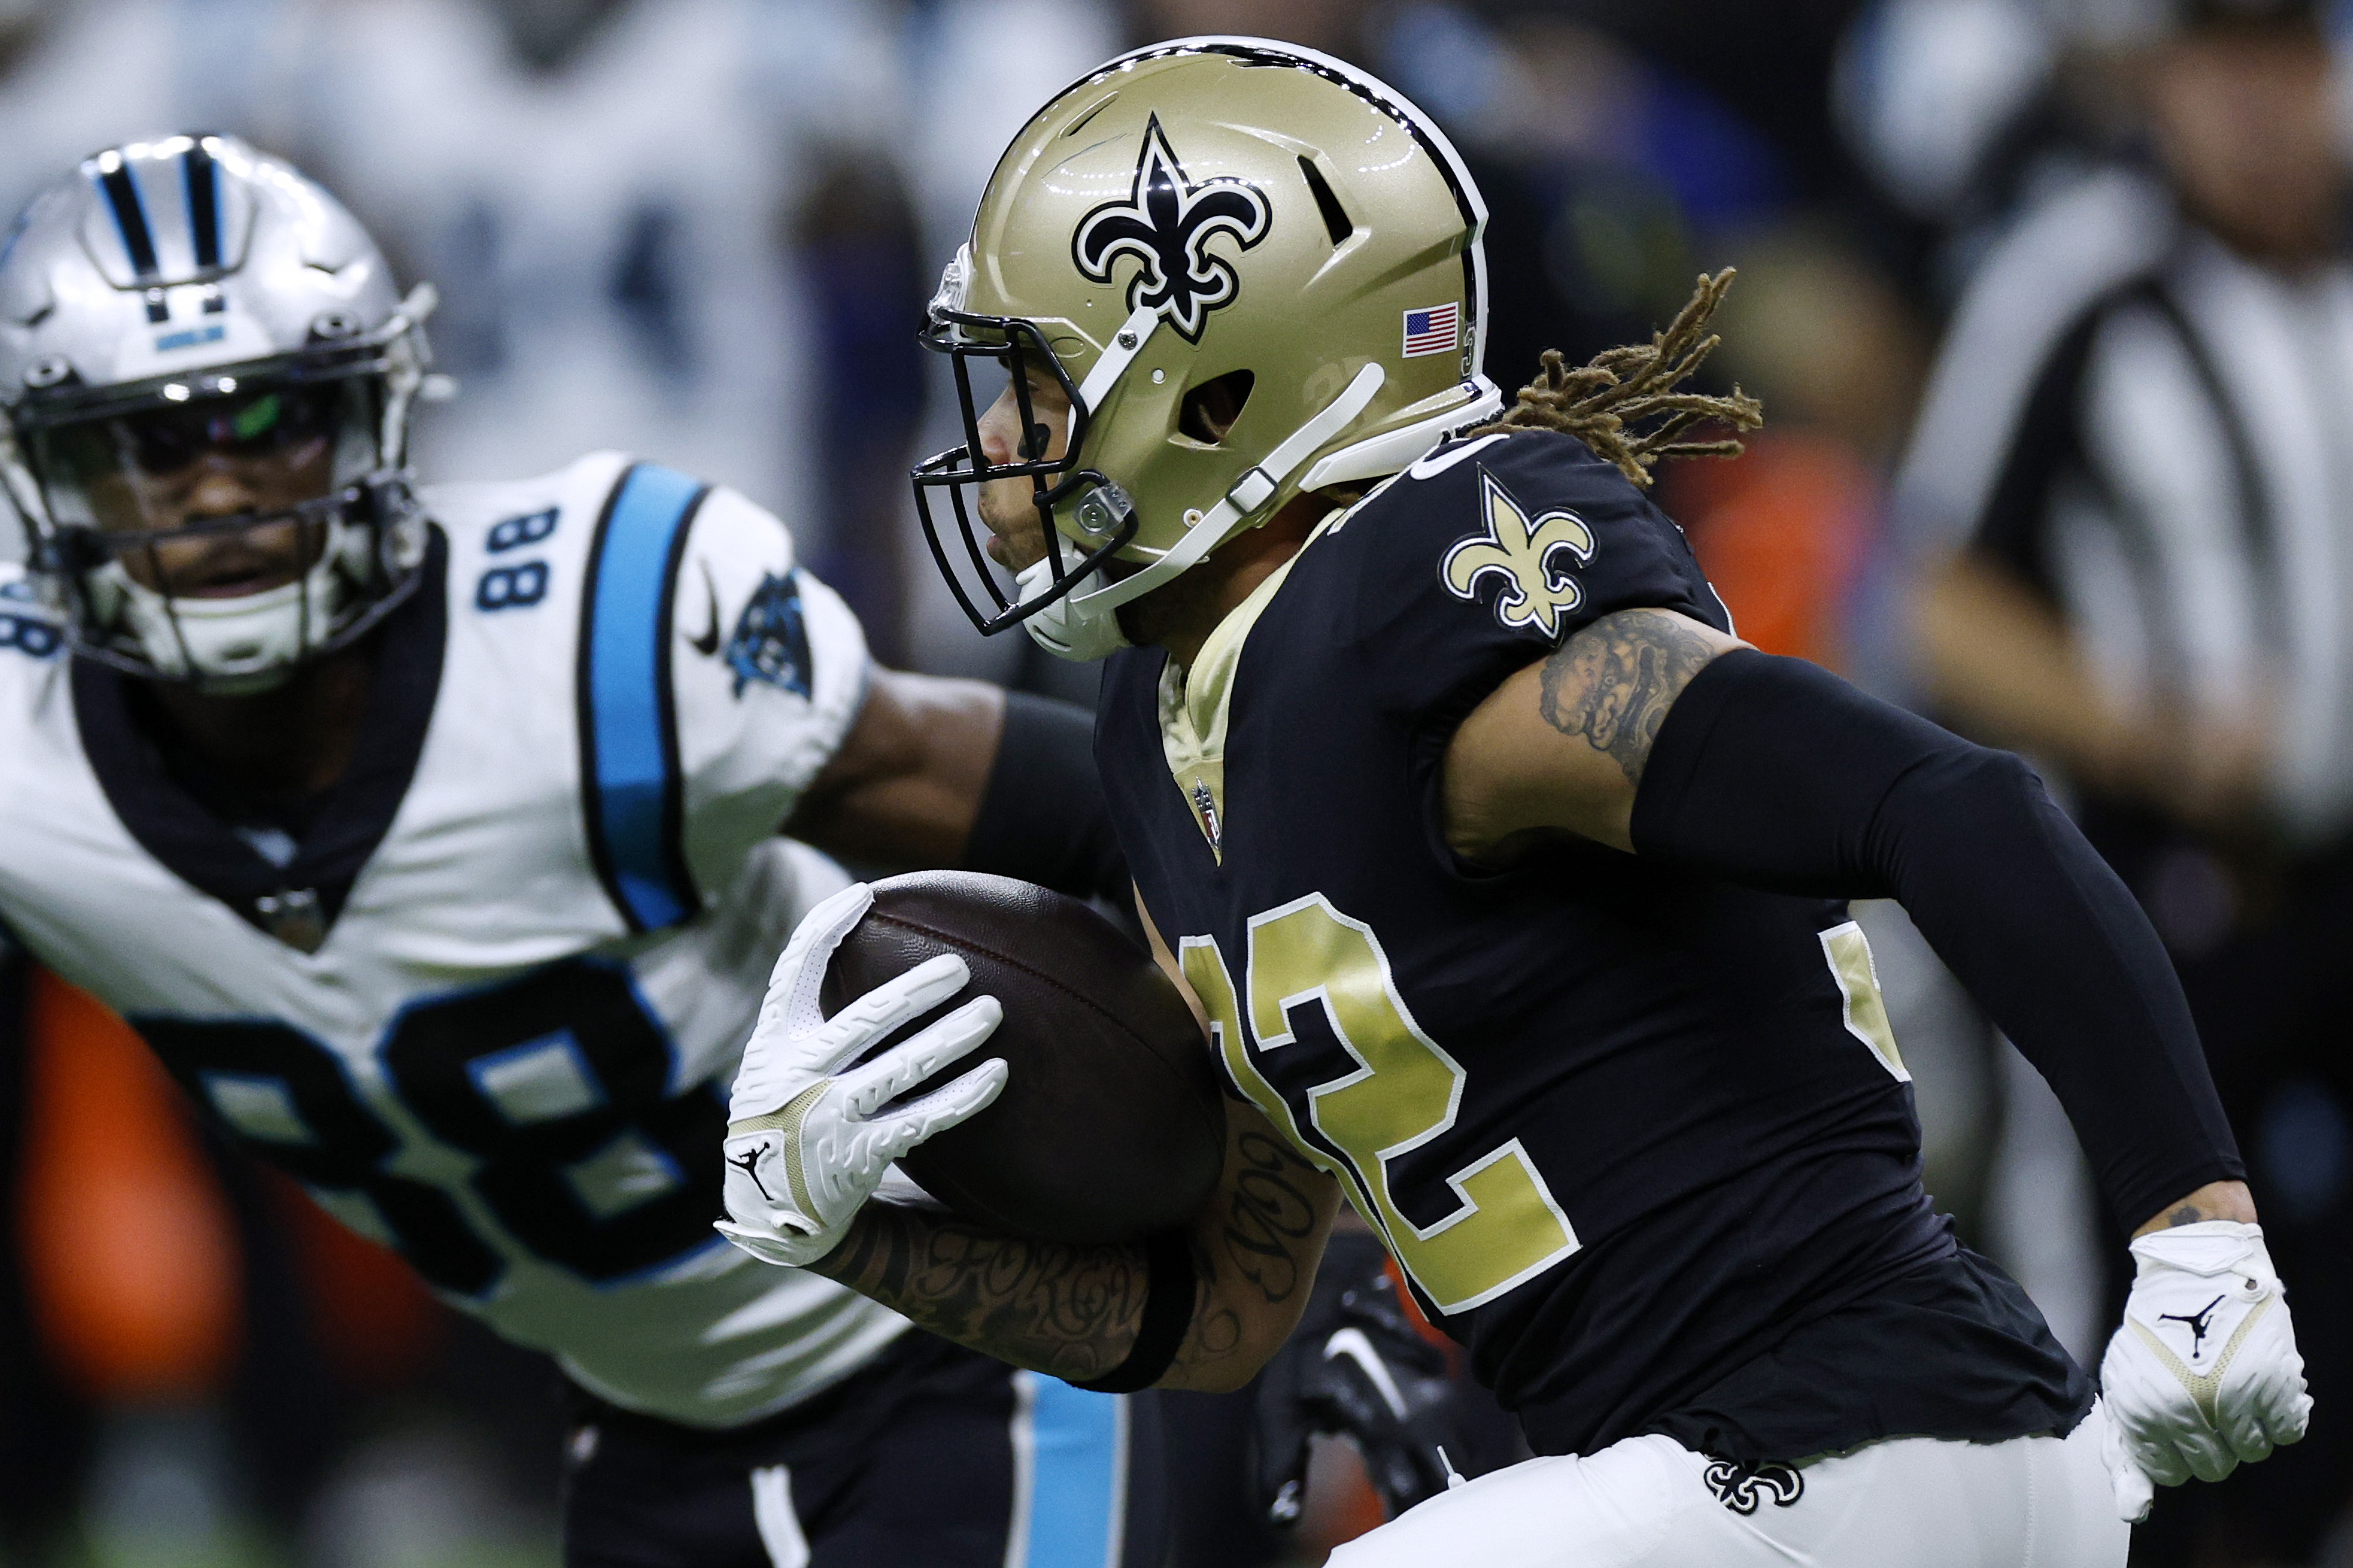 Saints vs. Panthers: How to watch, start time, TV schedule, radio